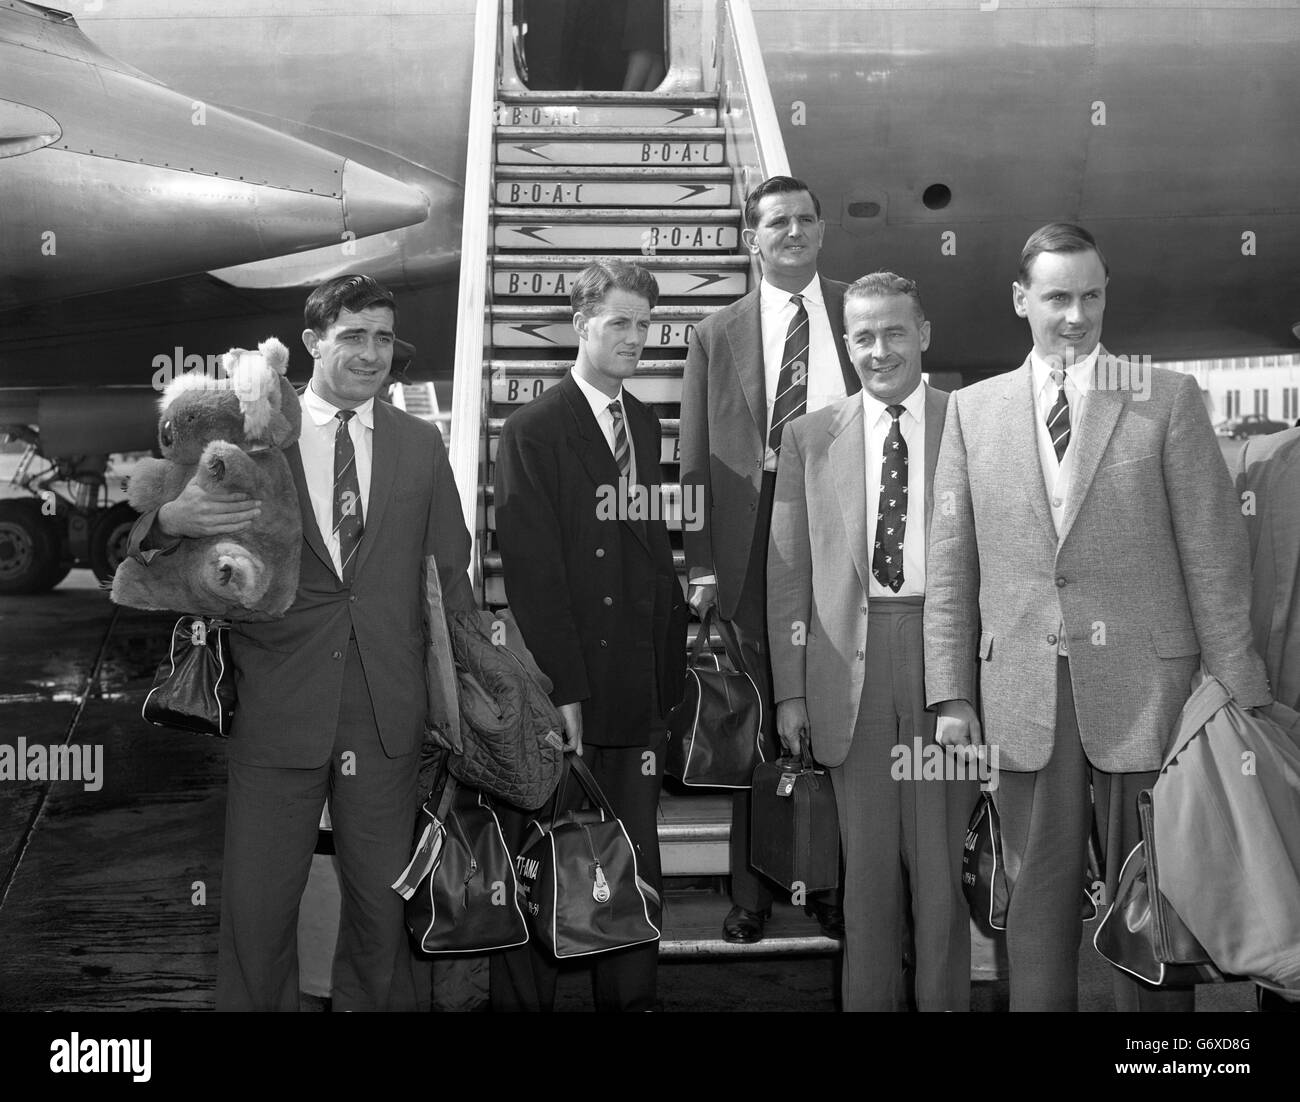 England and Surrey captain Peter May with other members of the MCC touring party on arrival at London Airport from the tour of Australia and New Zealand. (l-r) Freddie Truman, carrying a giant koala teddy bear; John Mortimore, Tom Graveney, Willie Watson and Peter May. Stock Photo